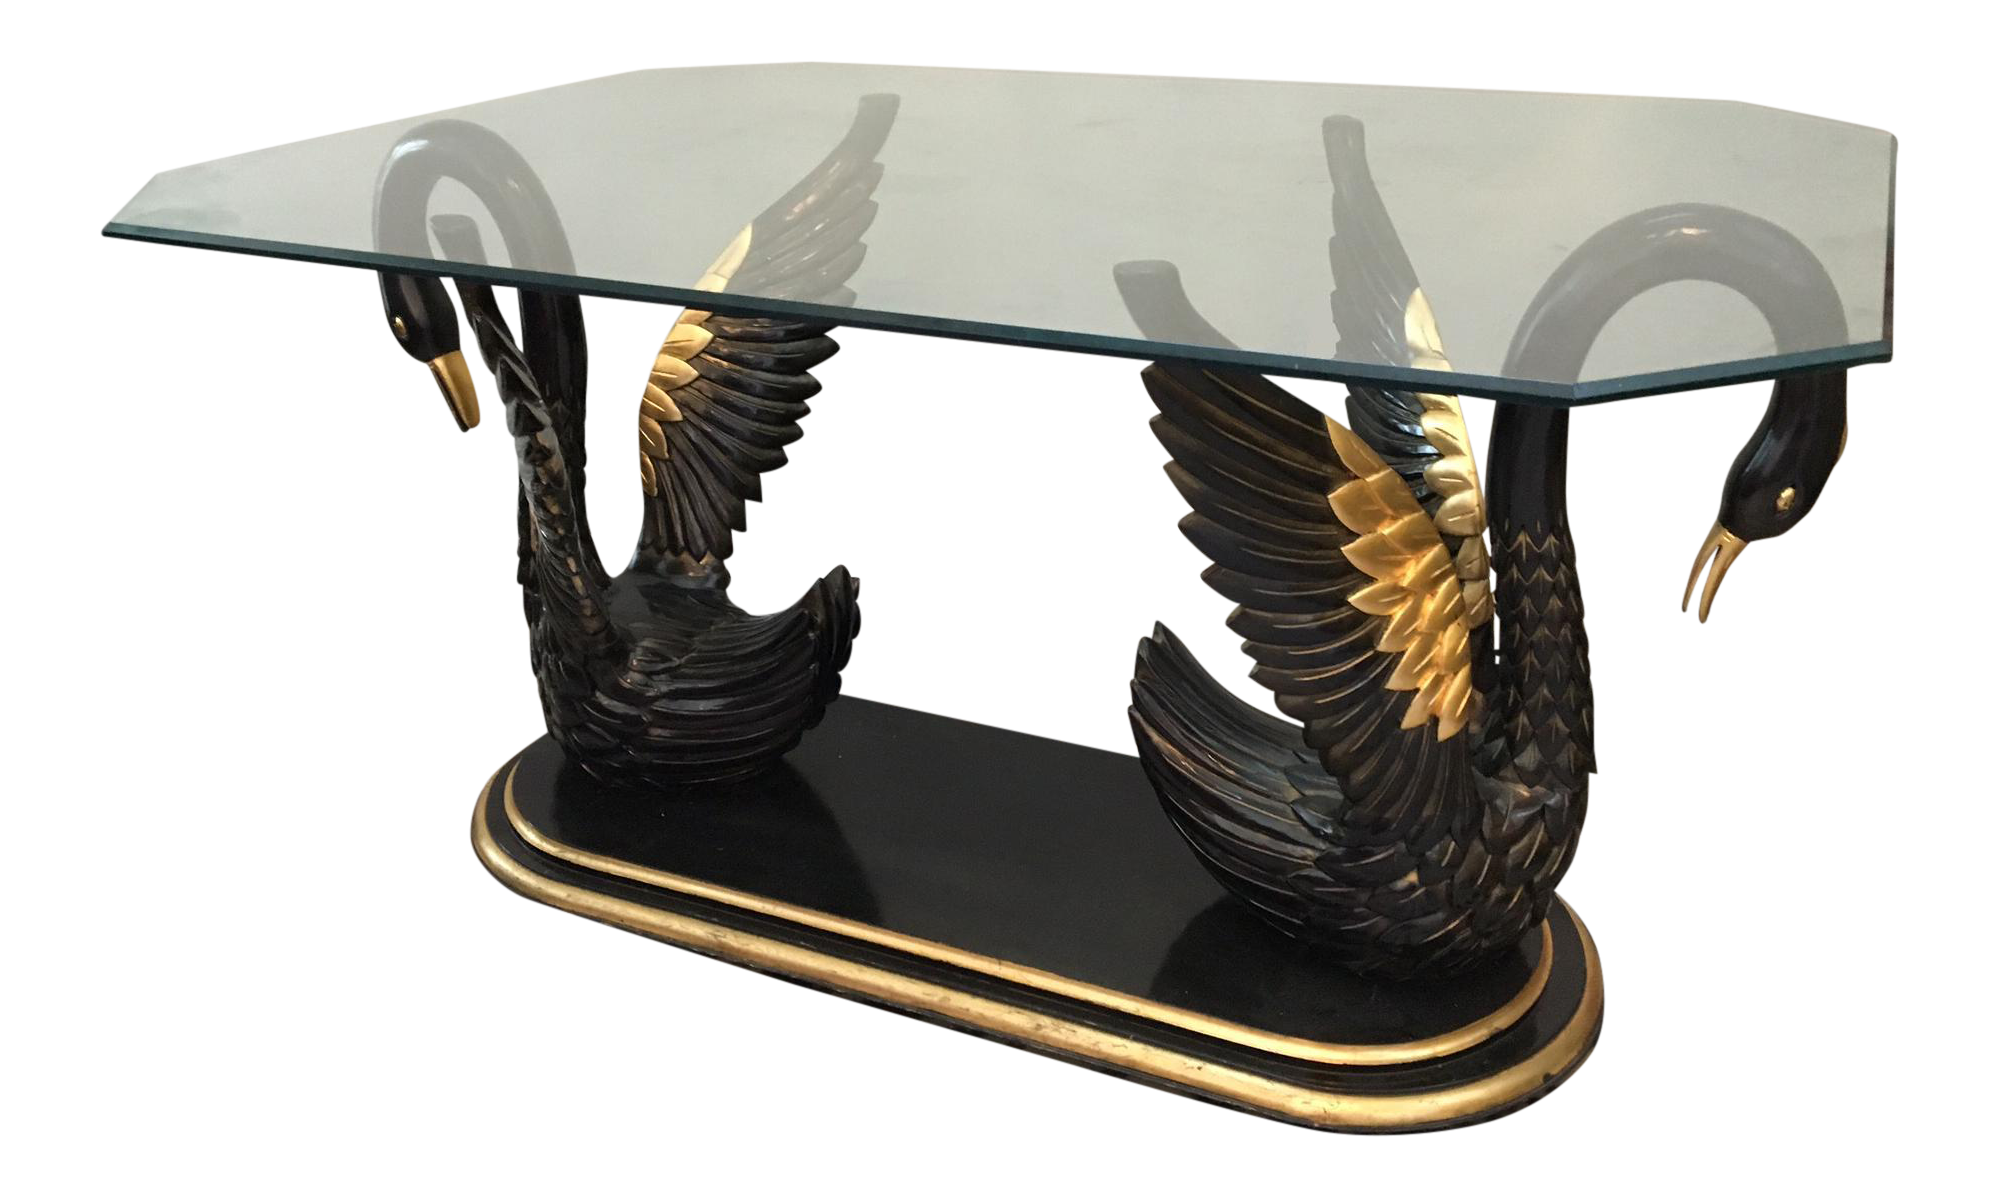 Sculptural Black Swan Statue Dining Table